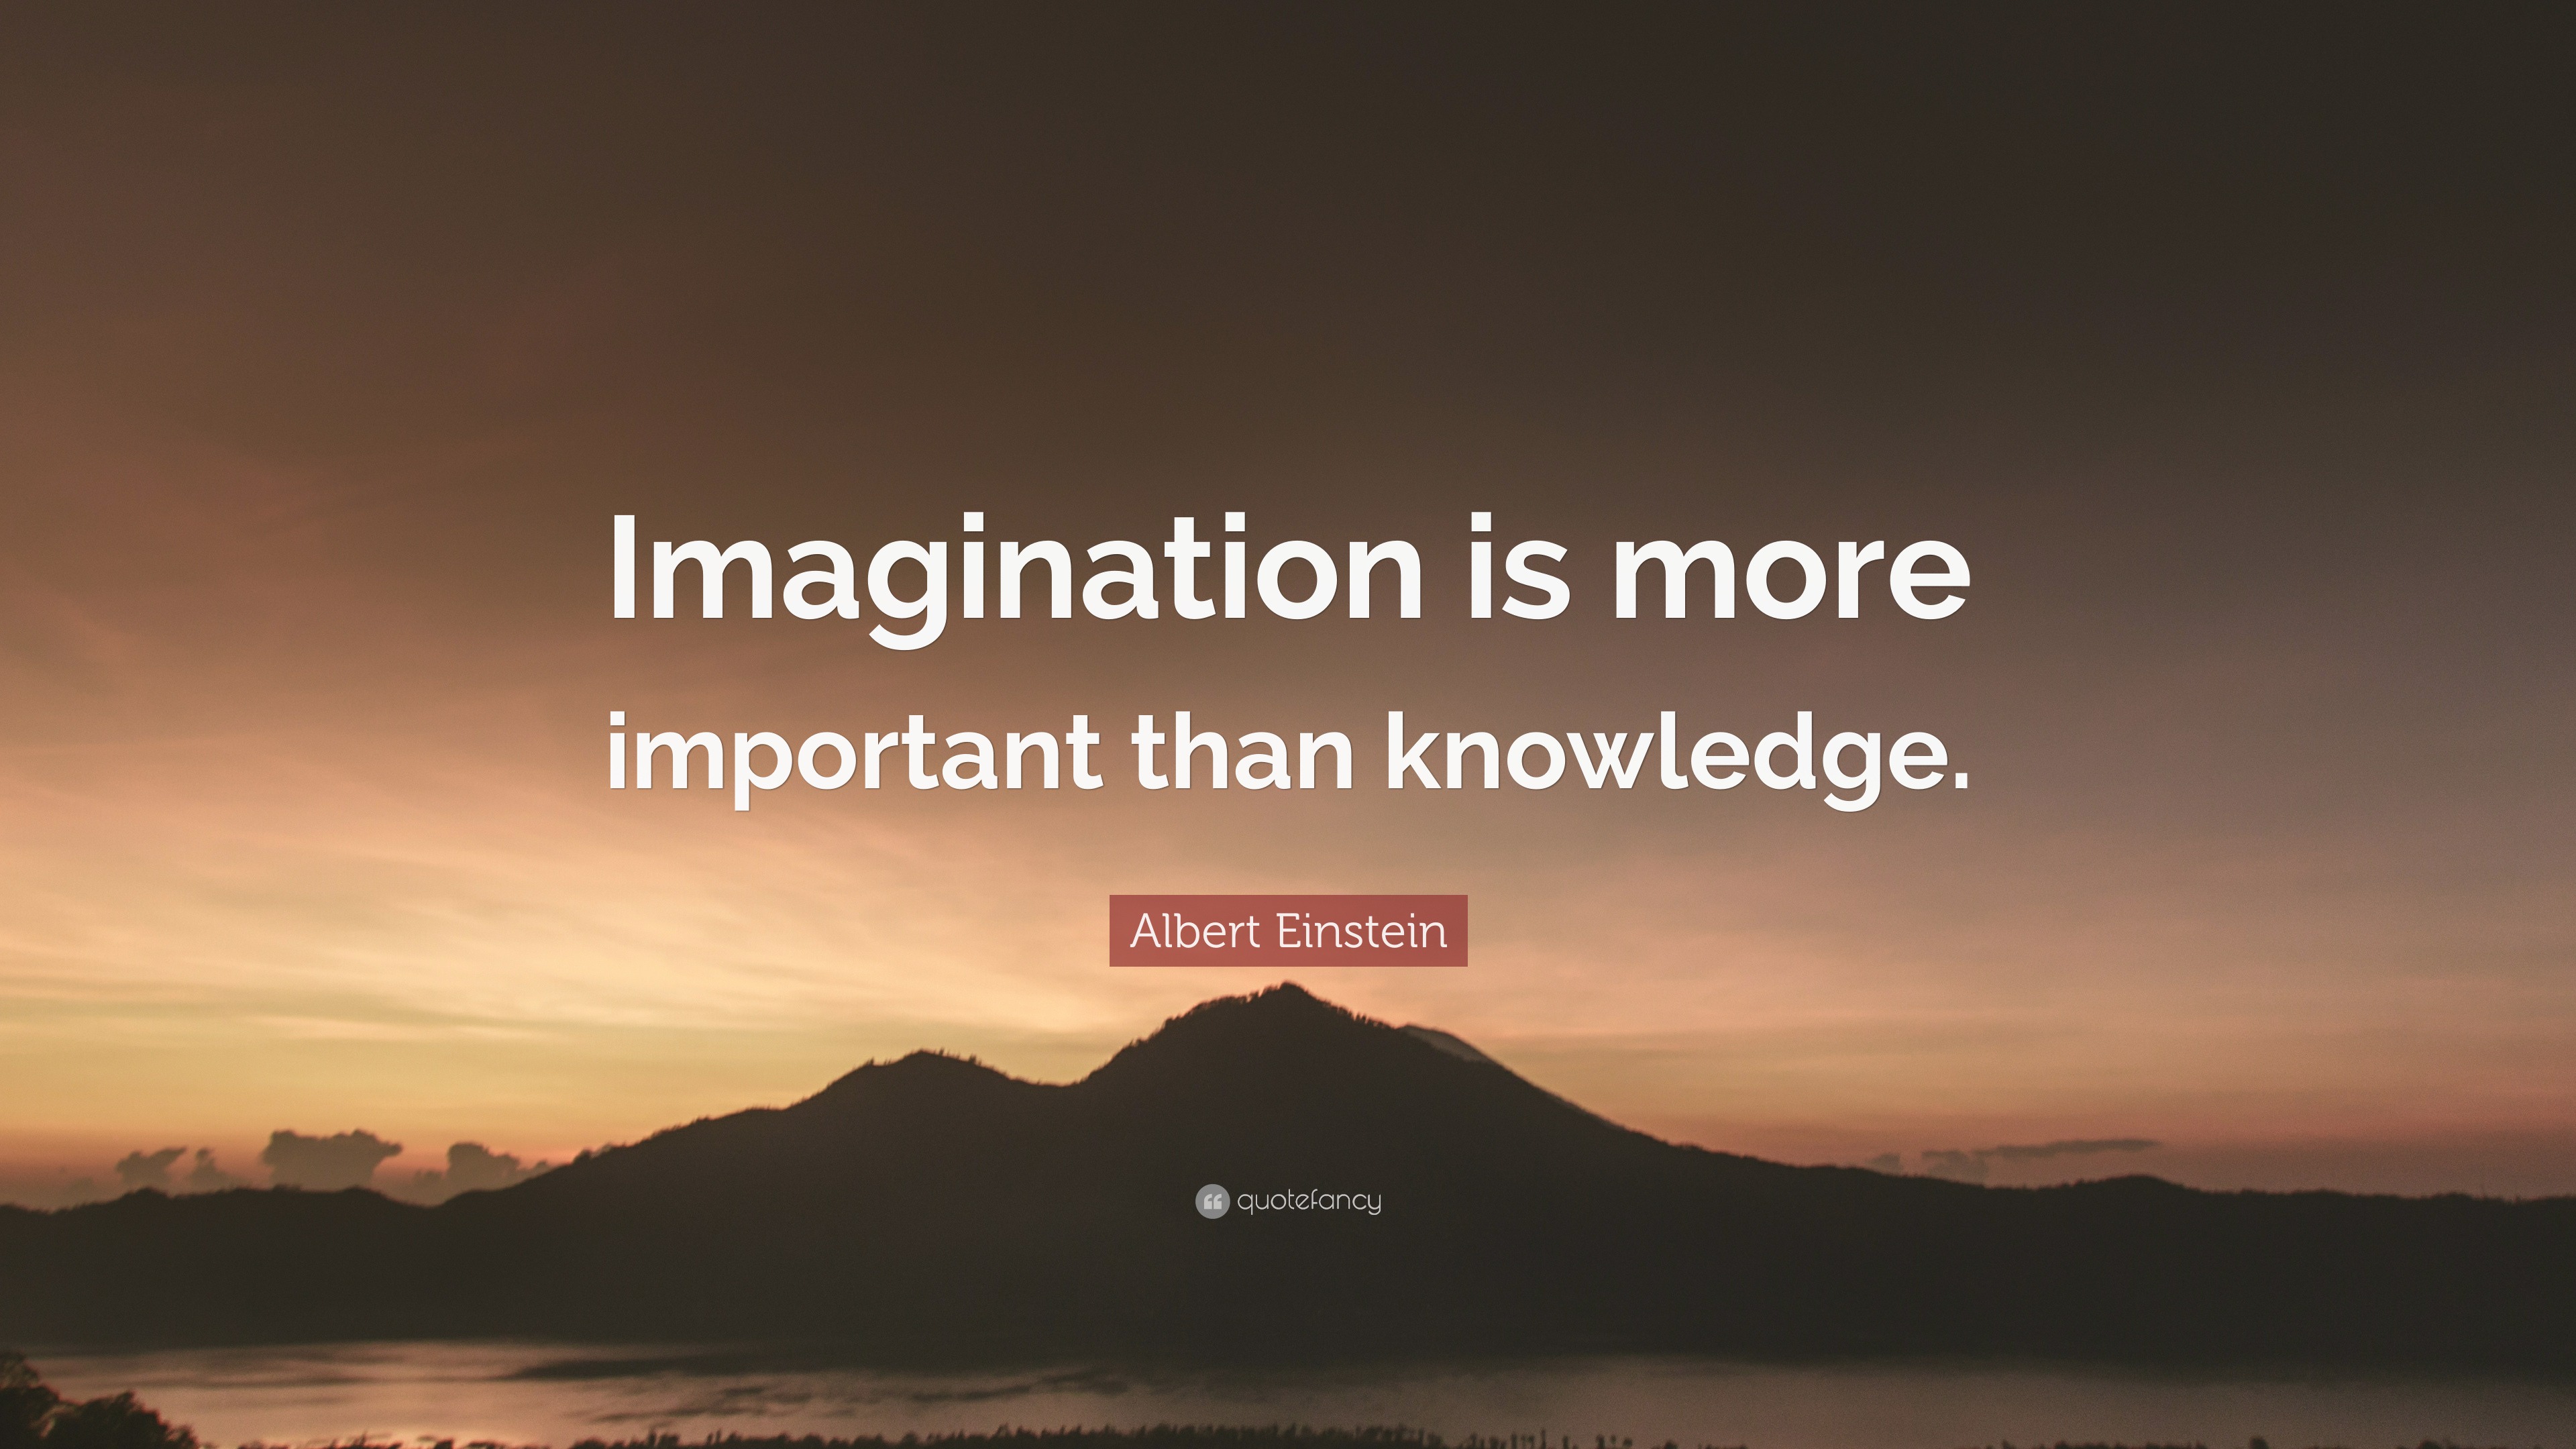 Albert Einstein Quote: “Imagination is more important than knowledge